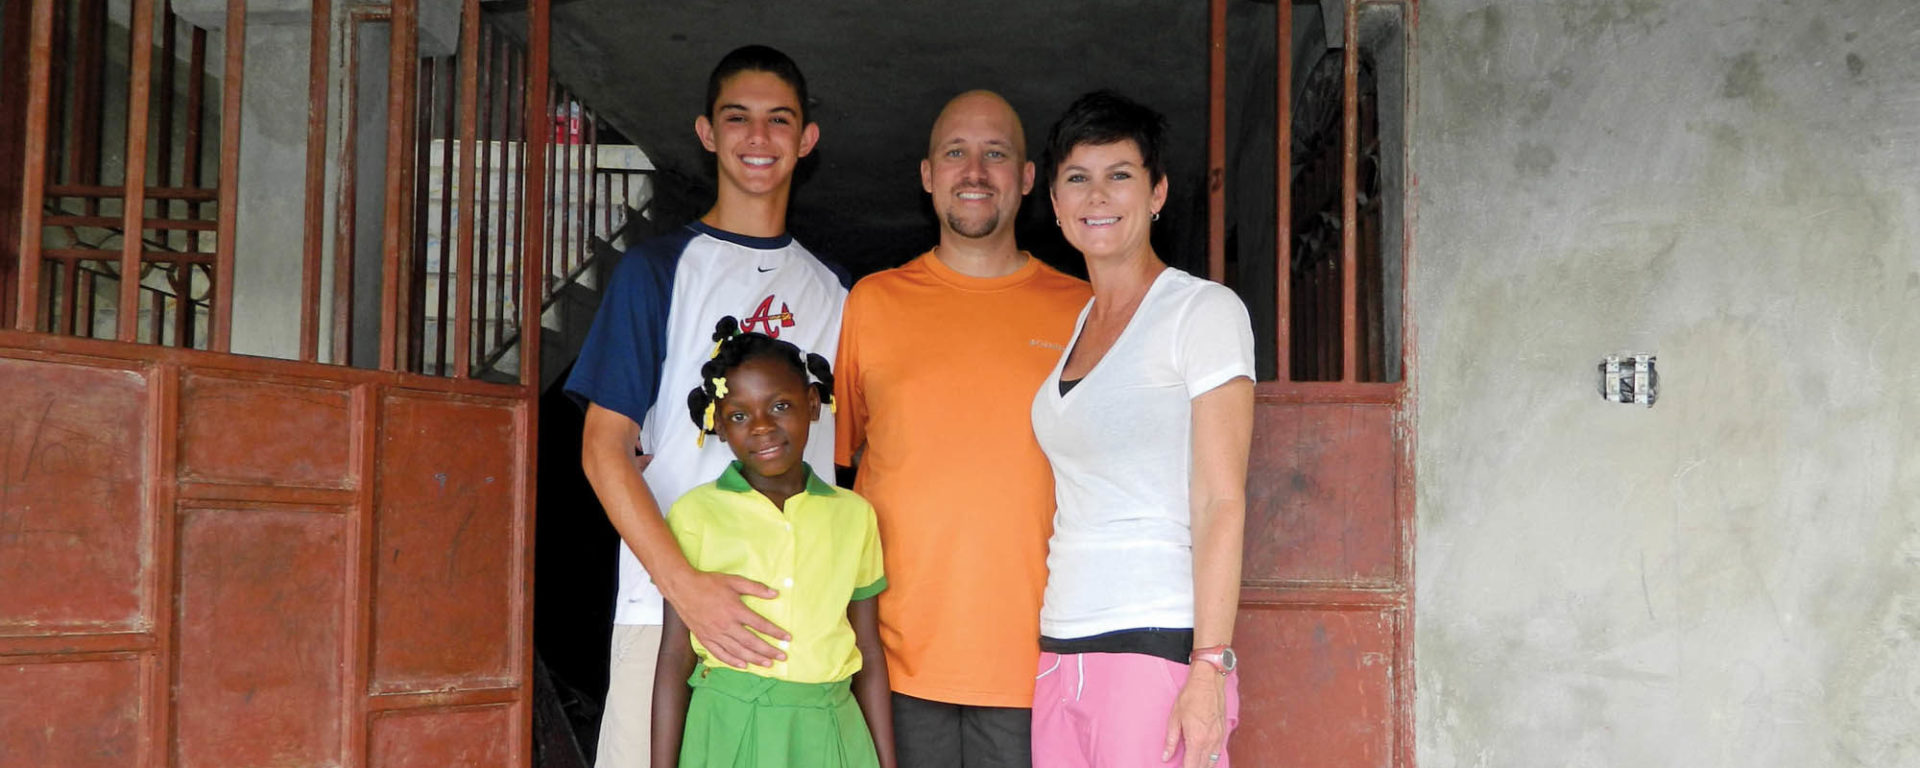 Harrison Kincaid, Onise, Stacy, and Sara Cox pose with one another in Haiti. (Photo courtesy of Stacy Cox)